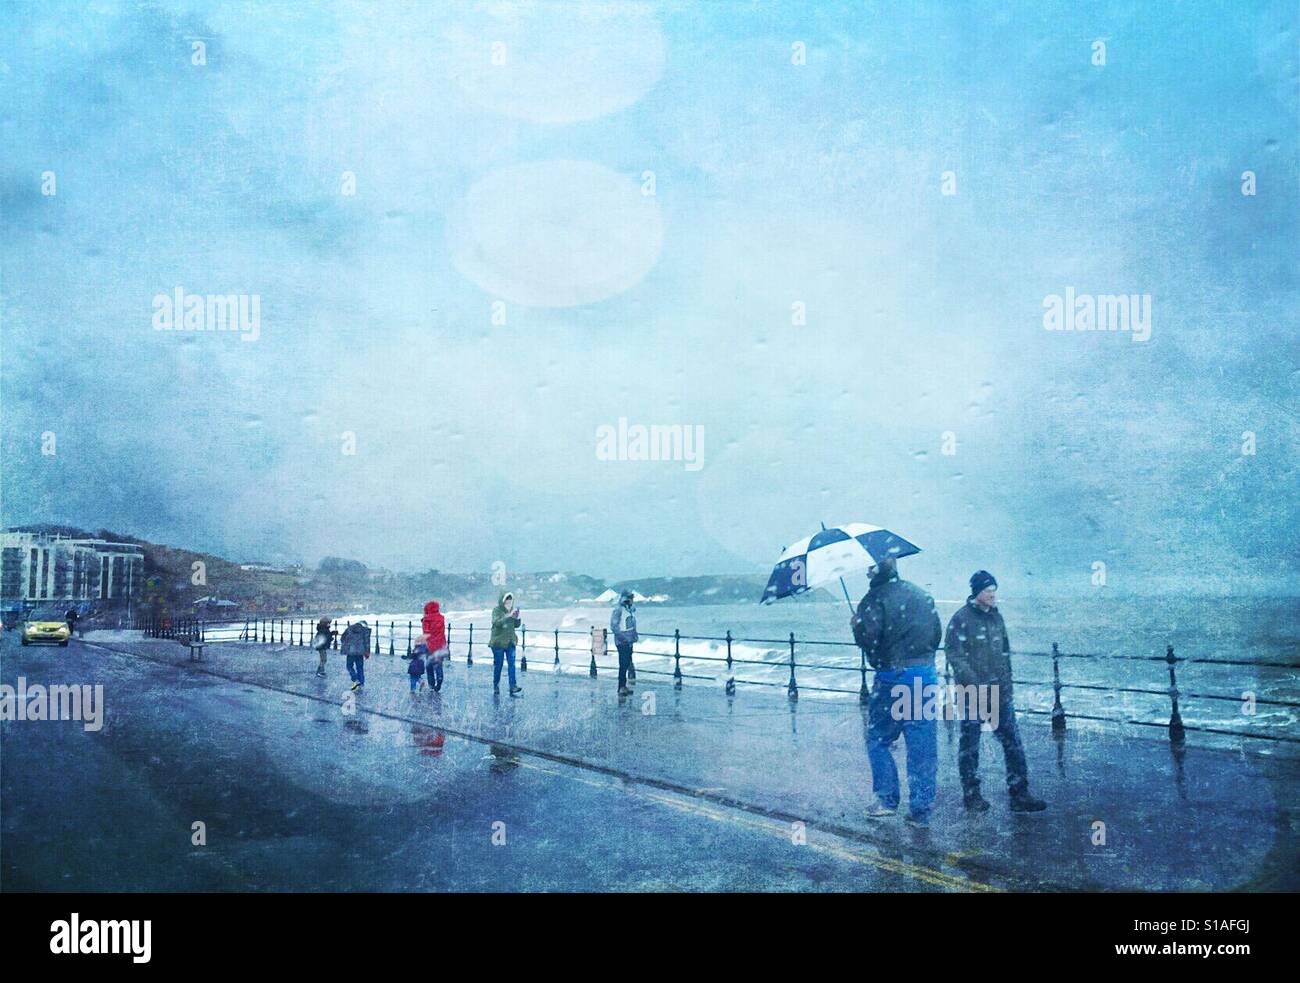 People walking along the seafront in rain and wind with a high sea. Stock Photo